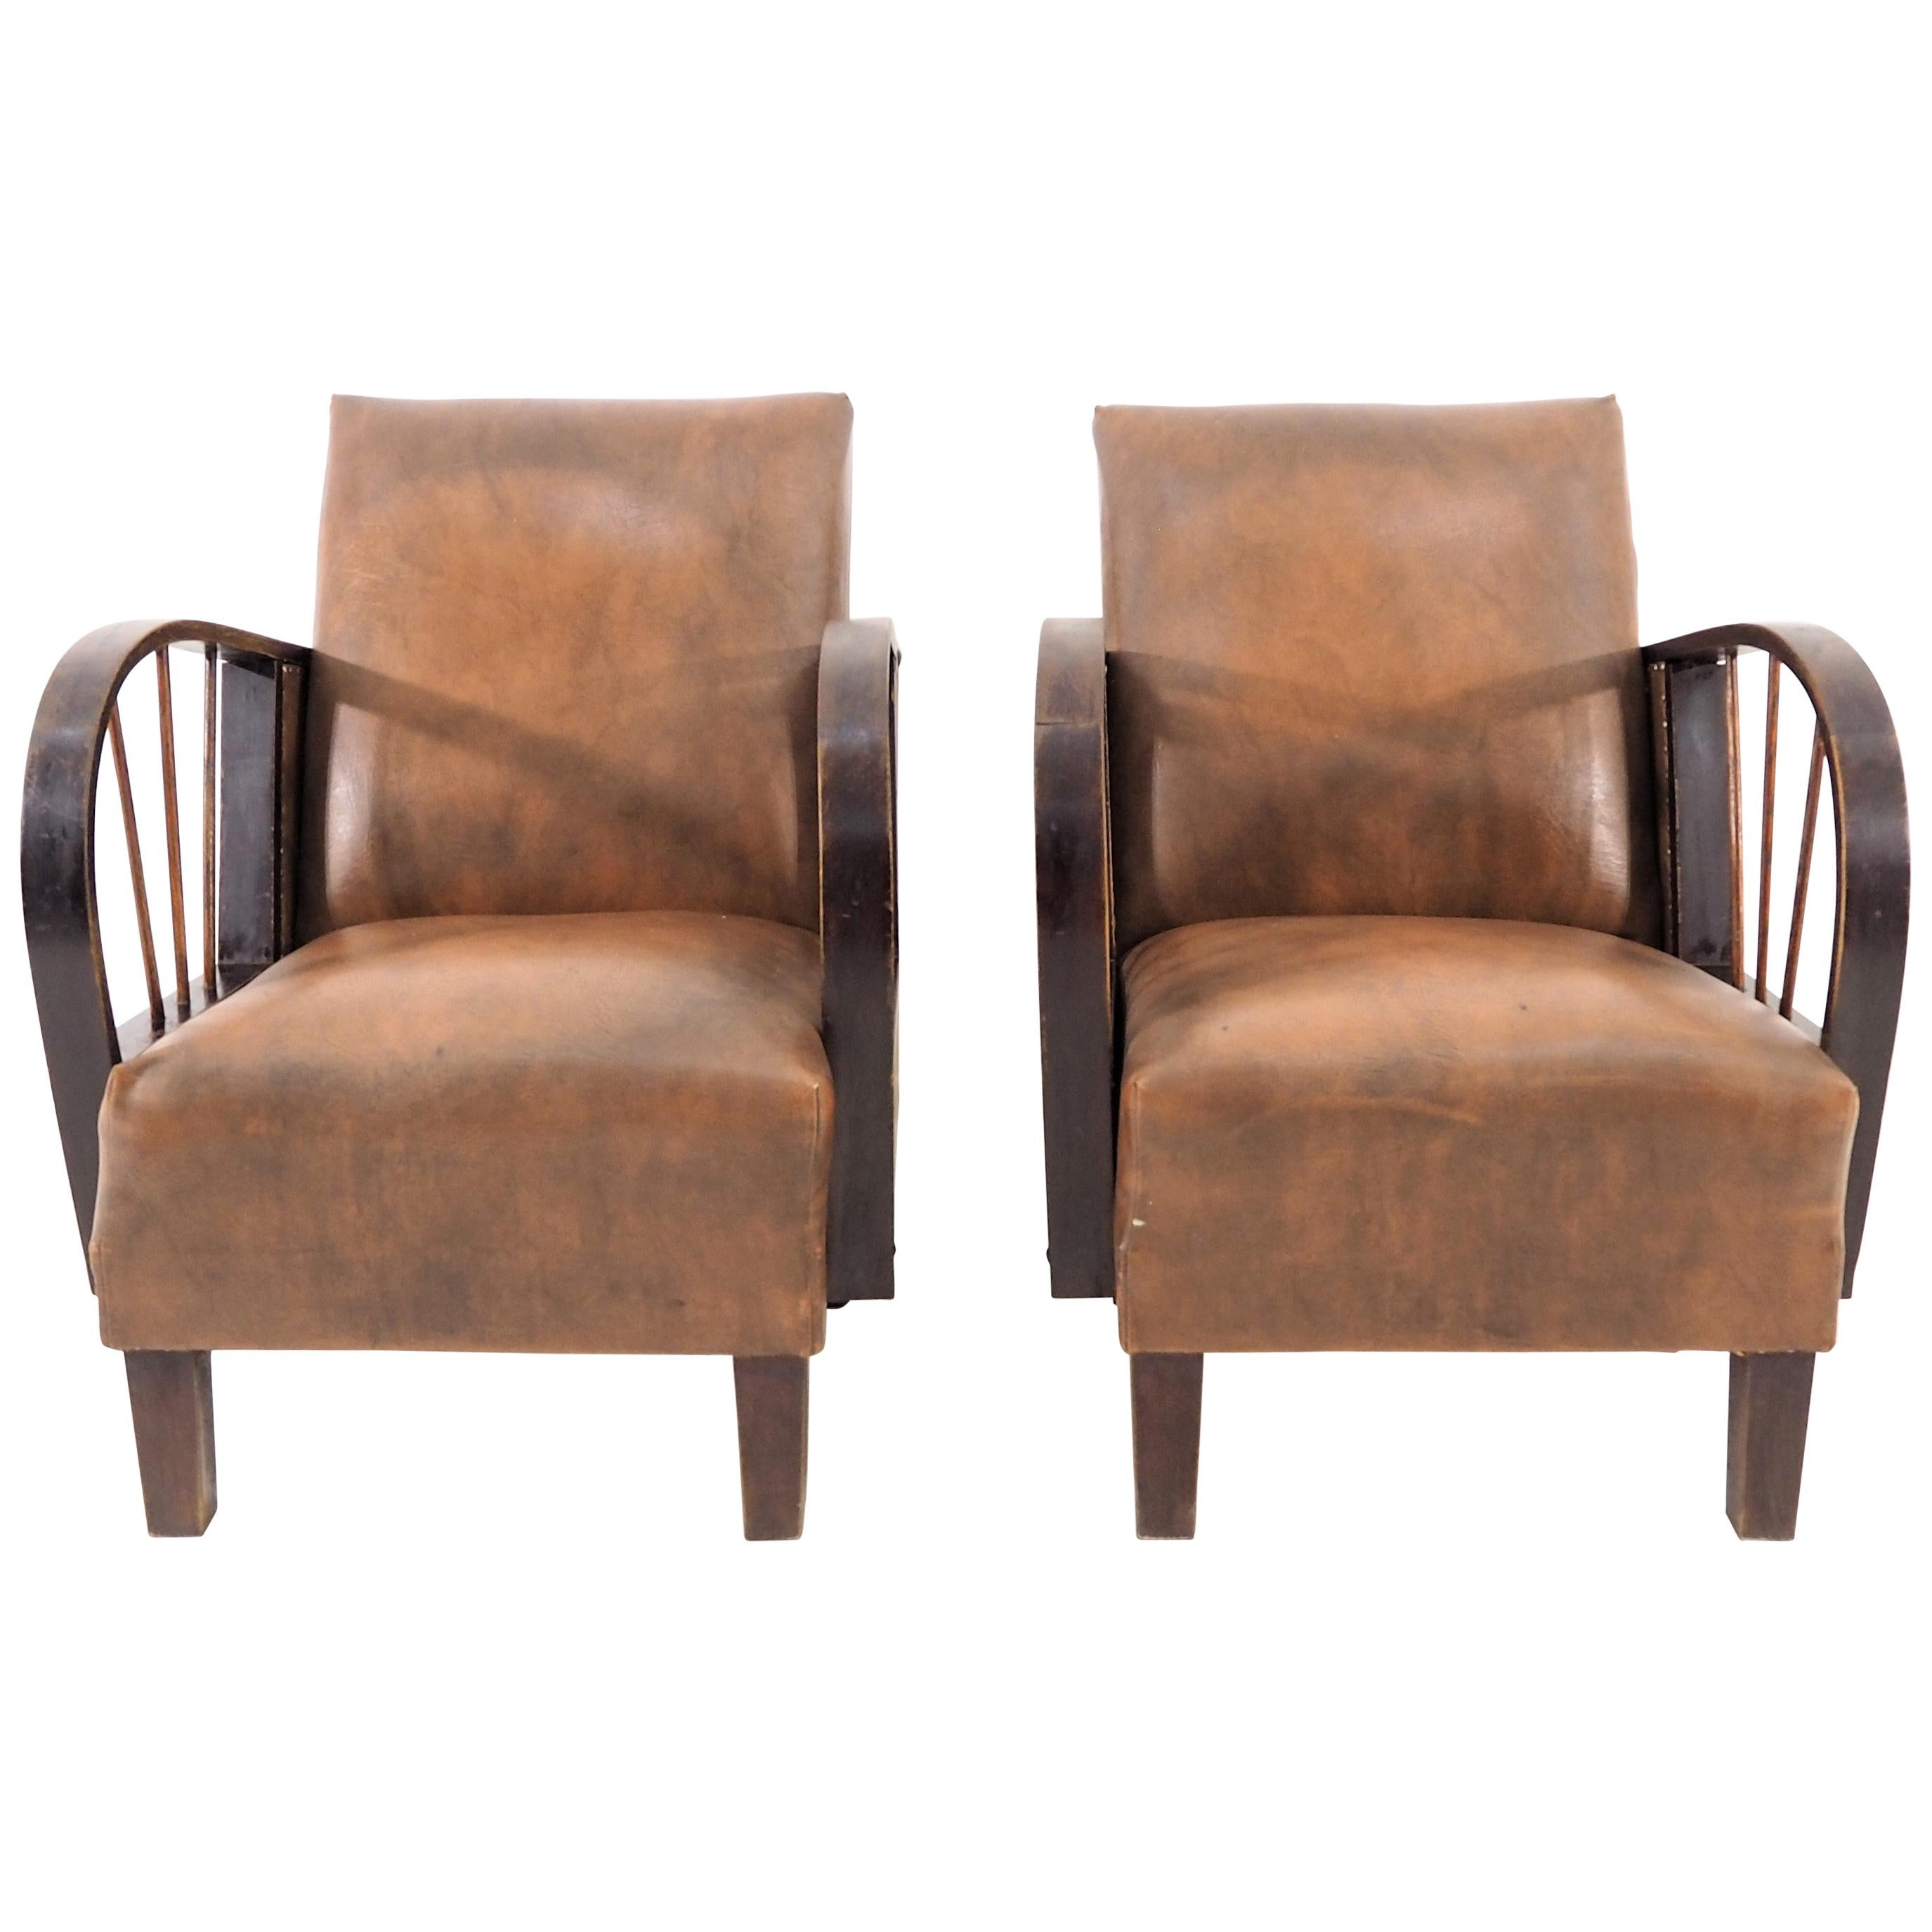 Set of 2 Vintage Lounge Chairs, Leather, 1970s For Sale